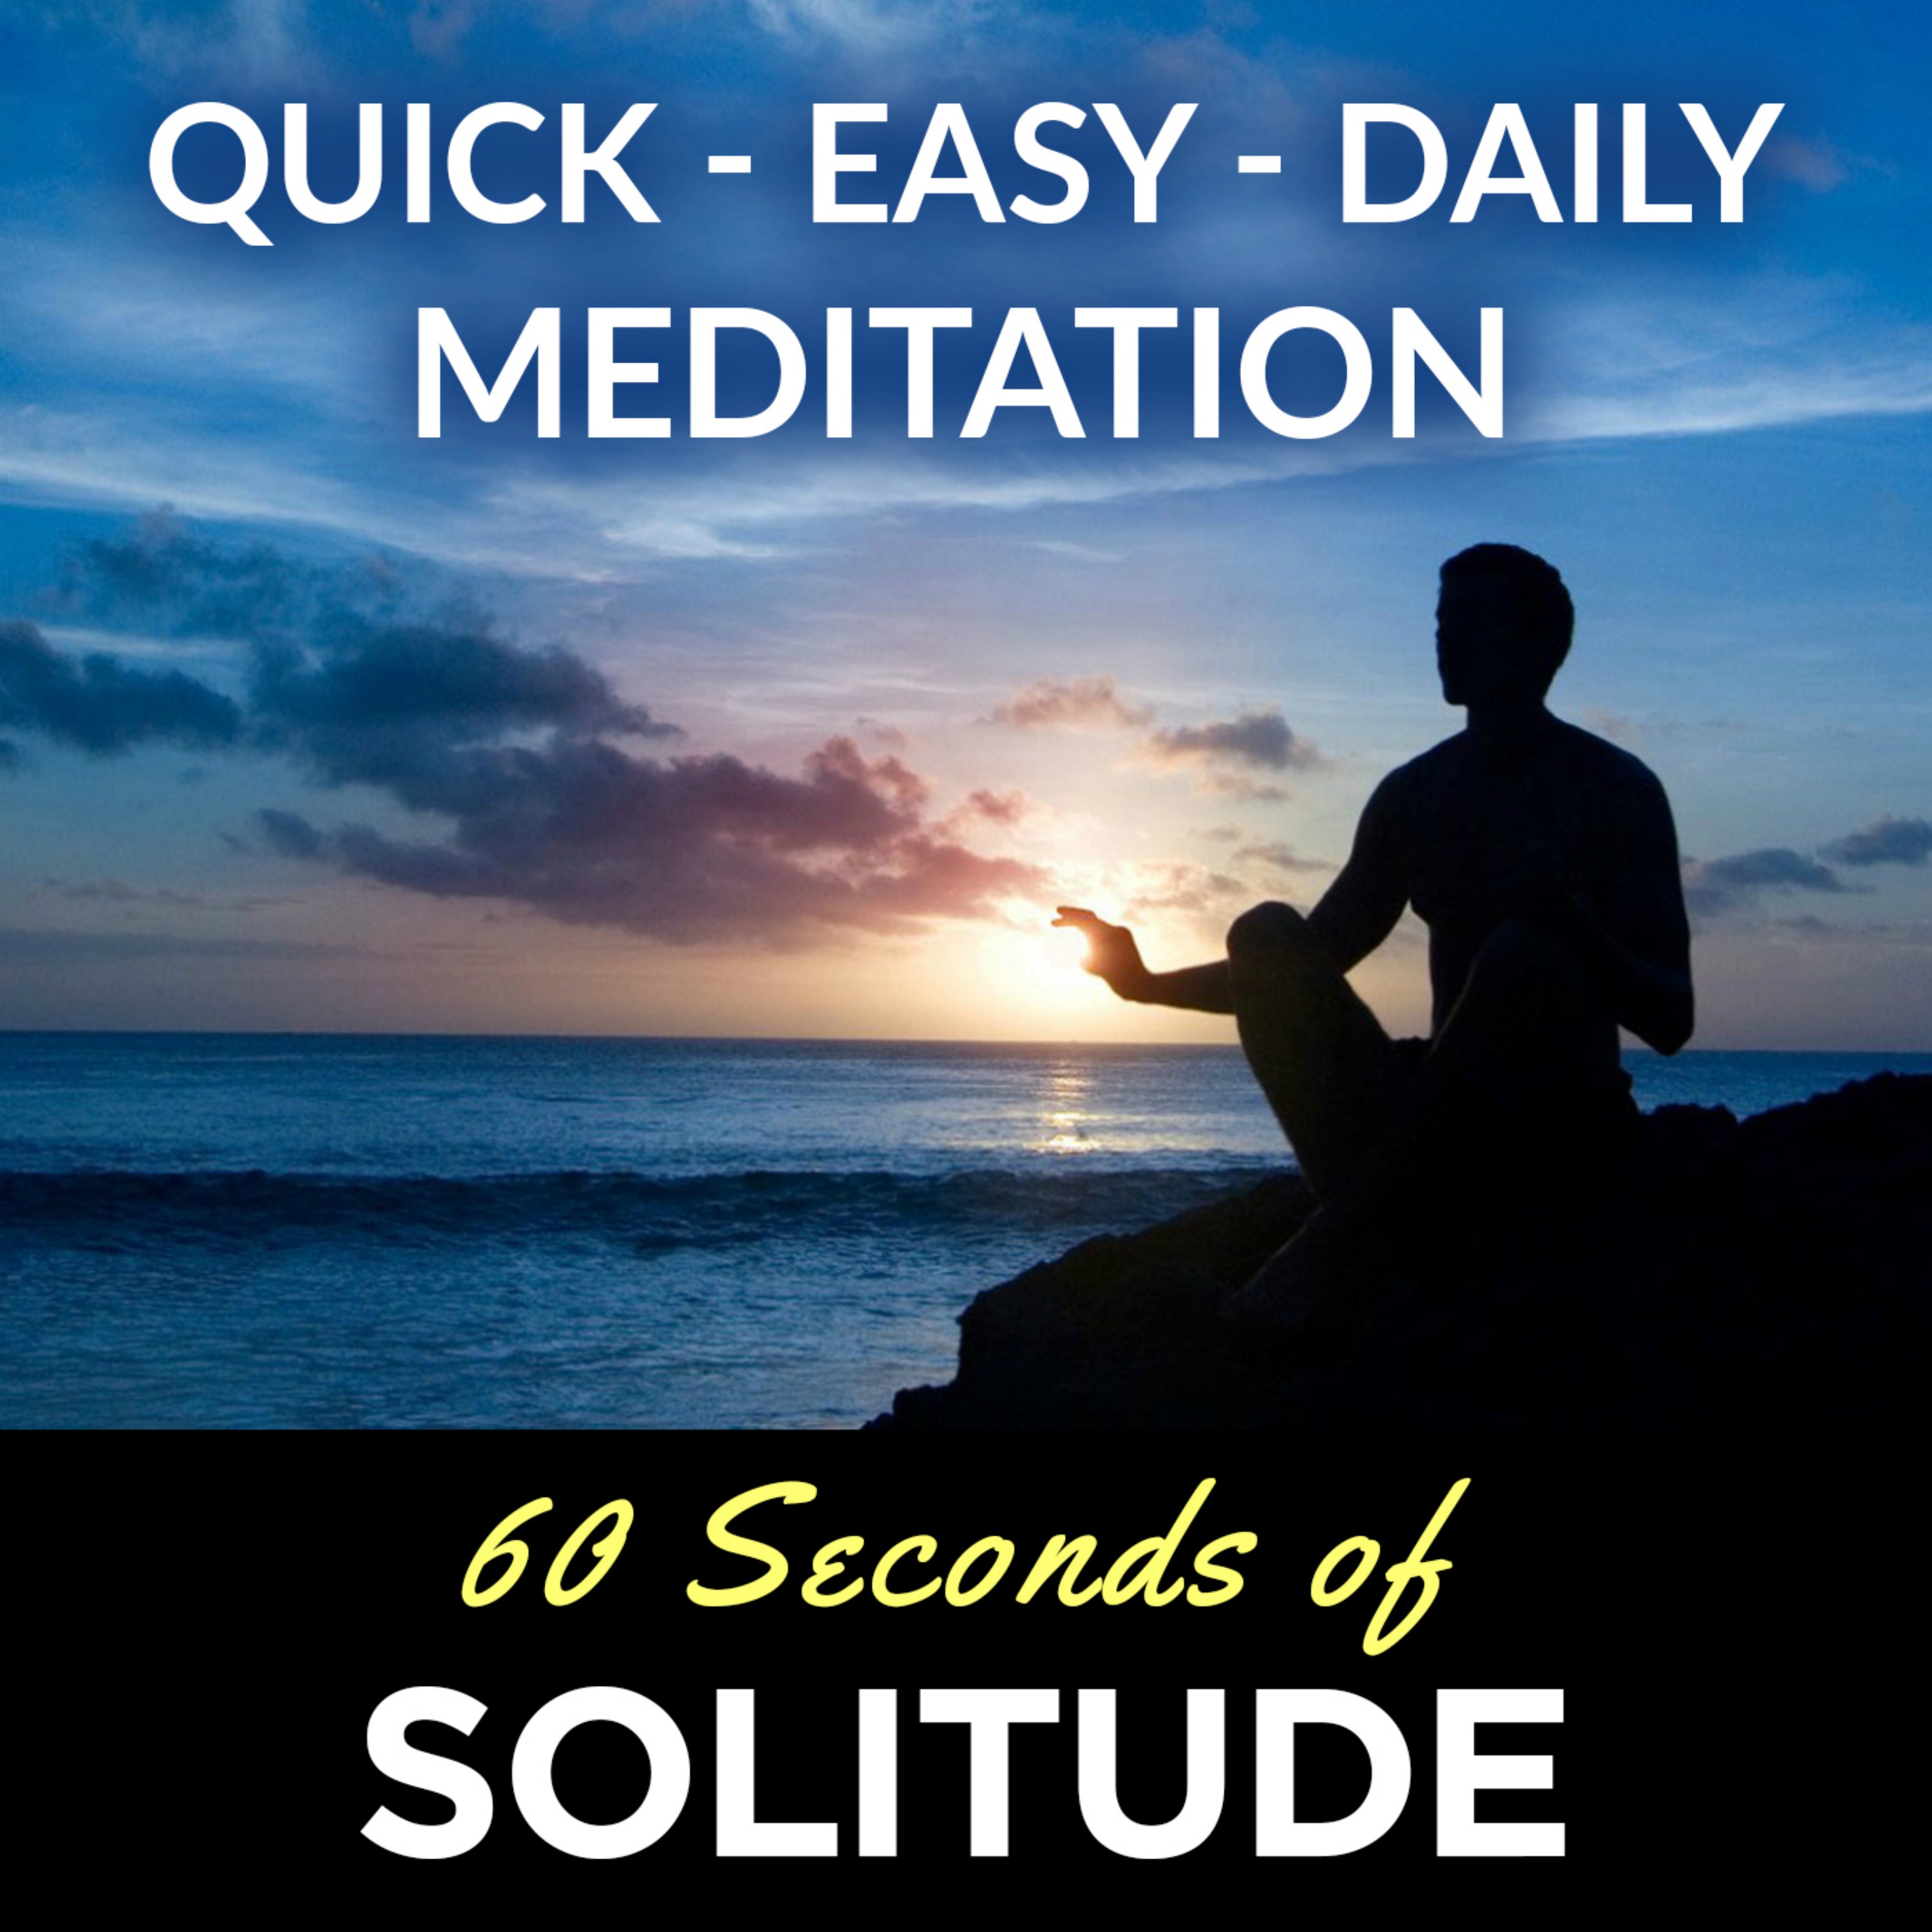 60 Seconds of Solitude | Mindfulness Mediation, Meditation for Beginners, Positive Energy, Peace + Love